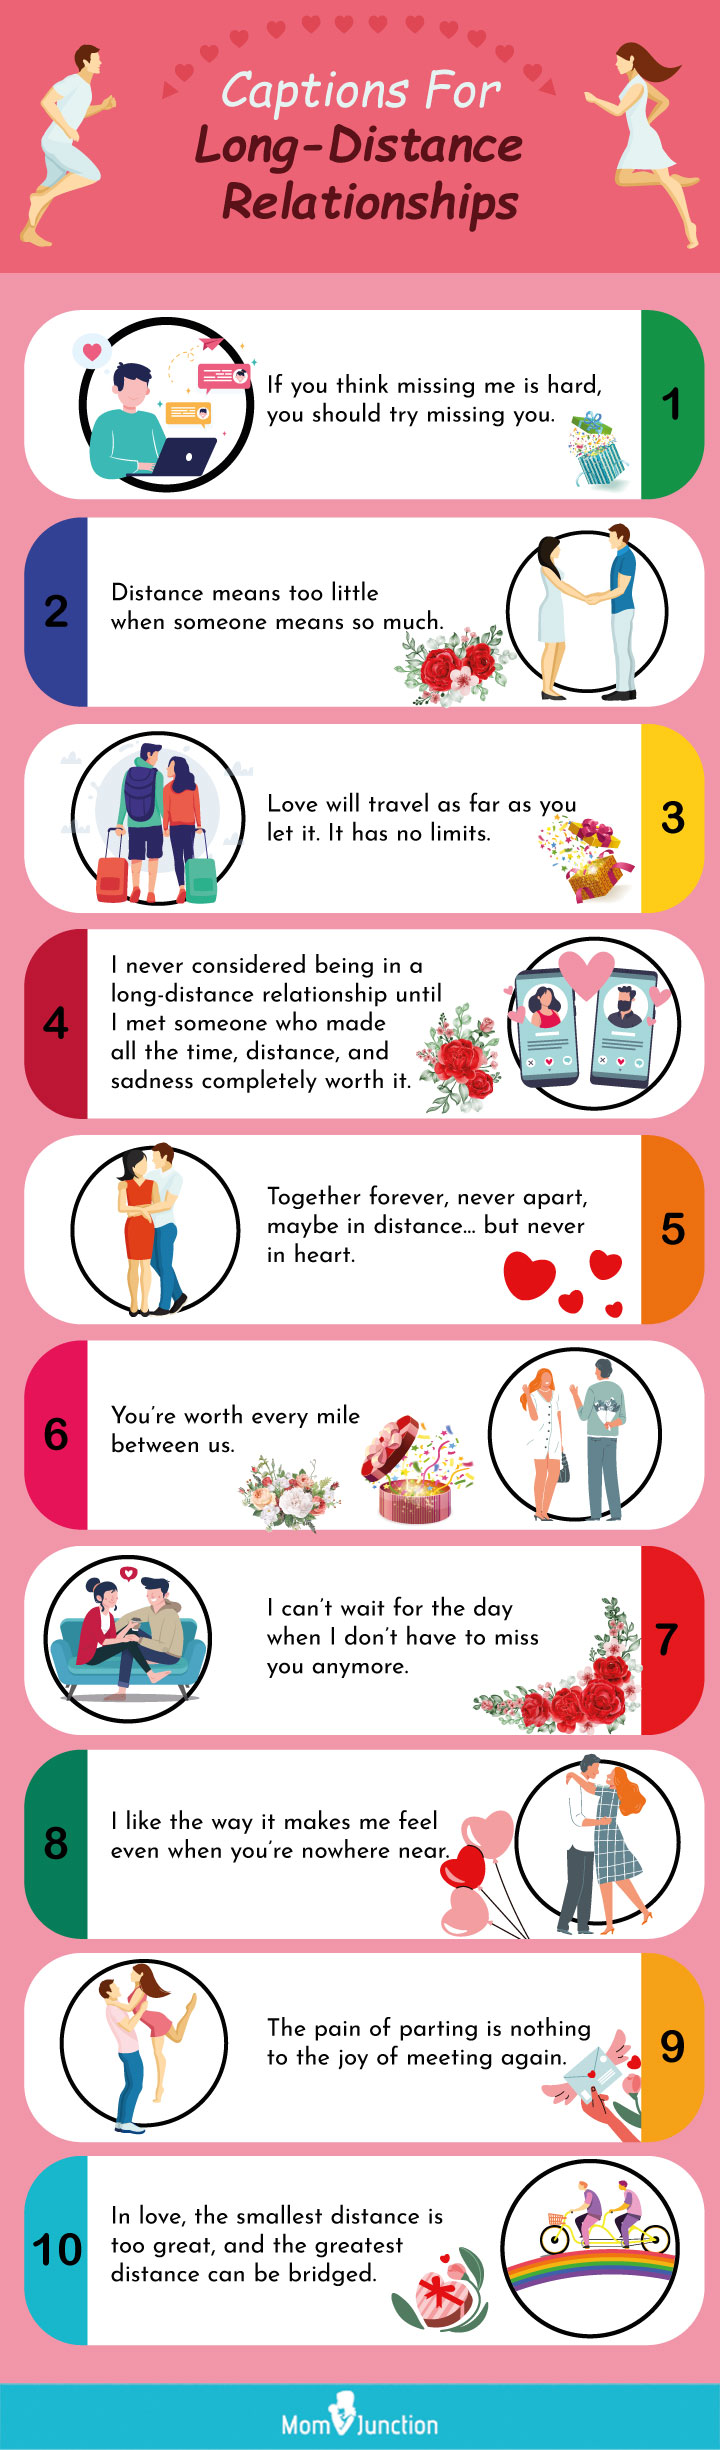 captions for long distance relationships (infographic)